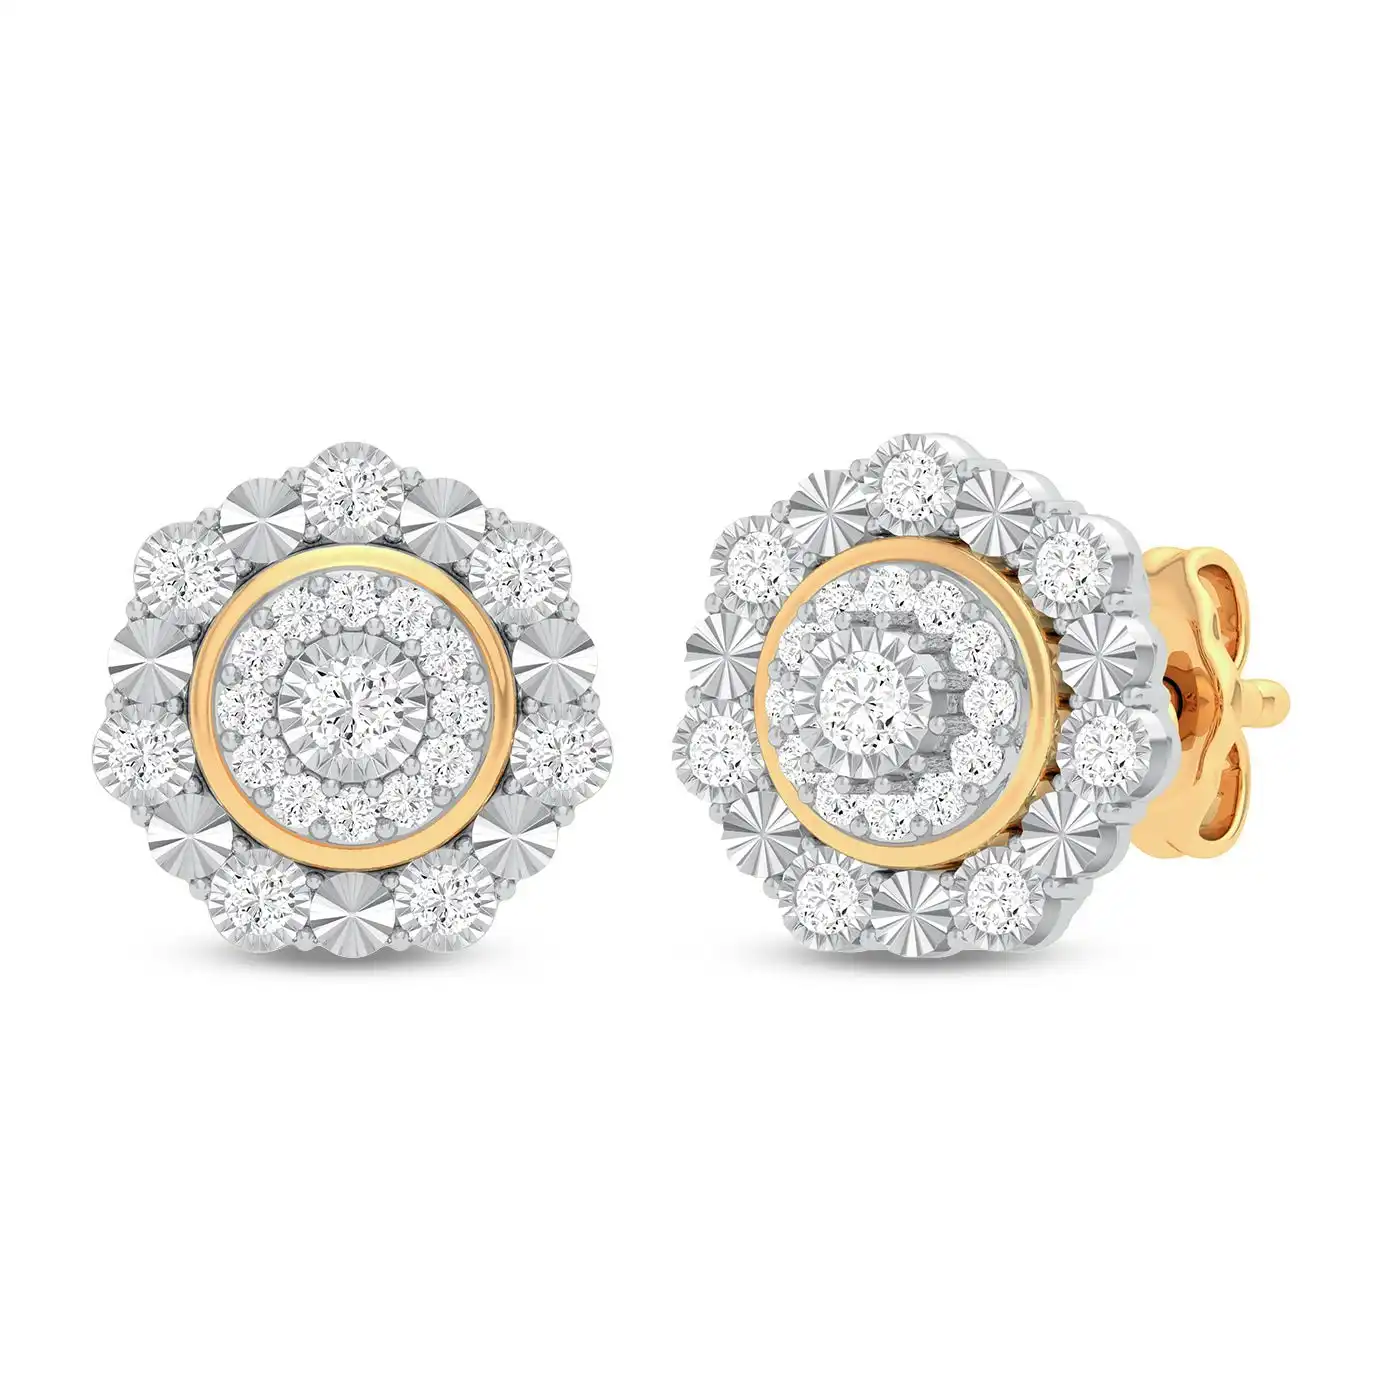 Miracle Halo Earrings with 0.15ct of Diamonds in 9ct Yellow Gold